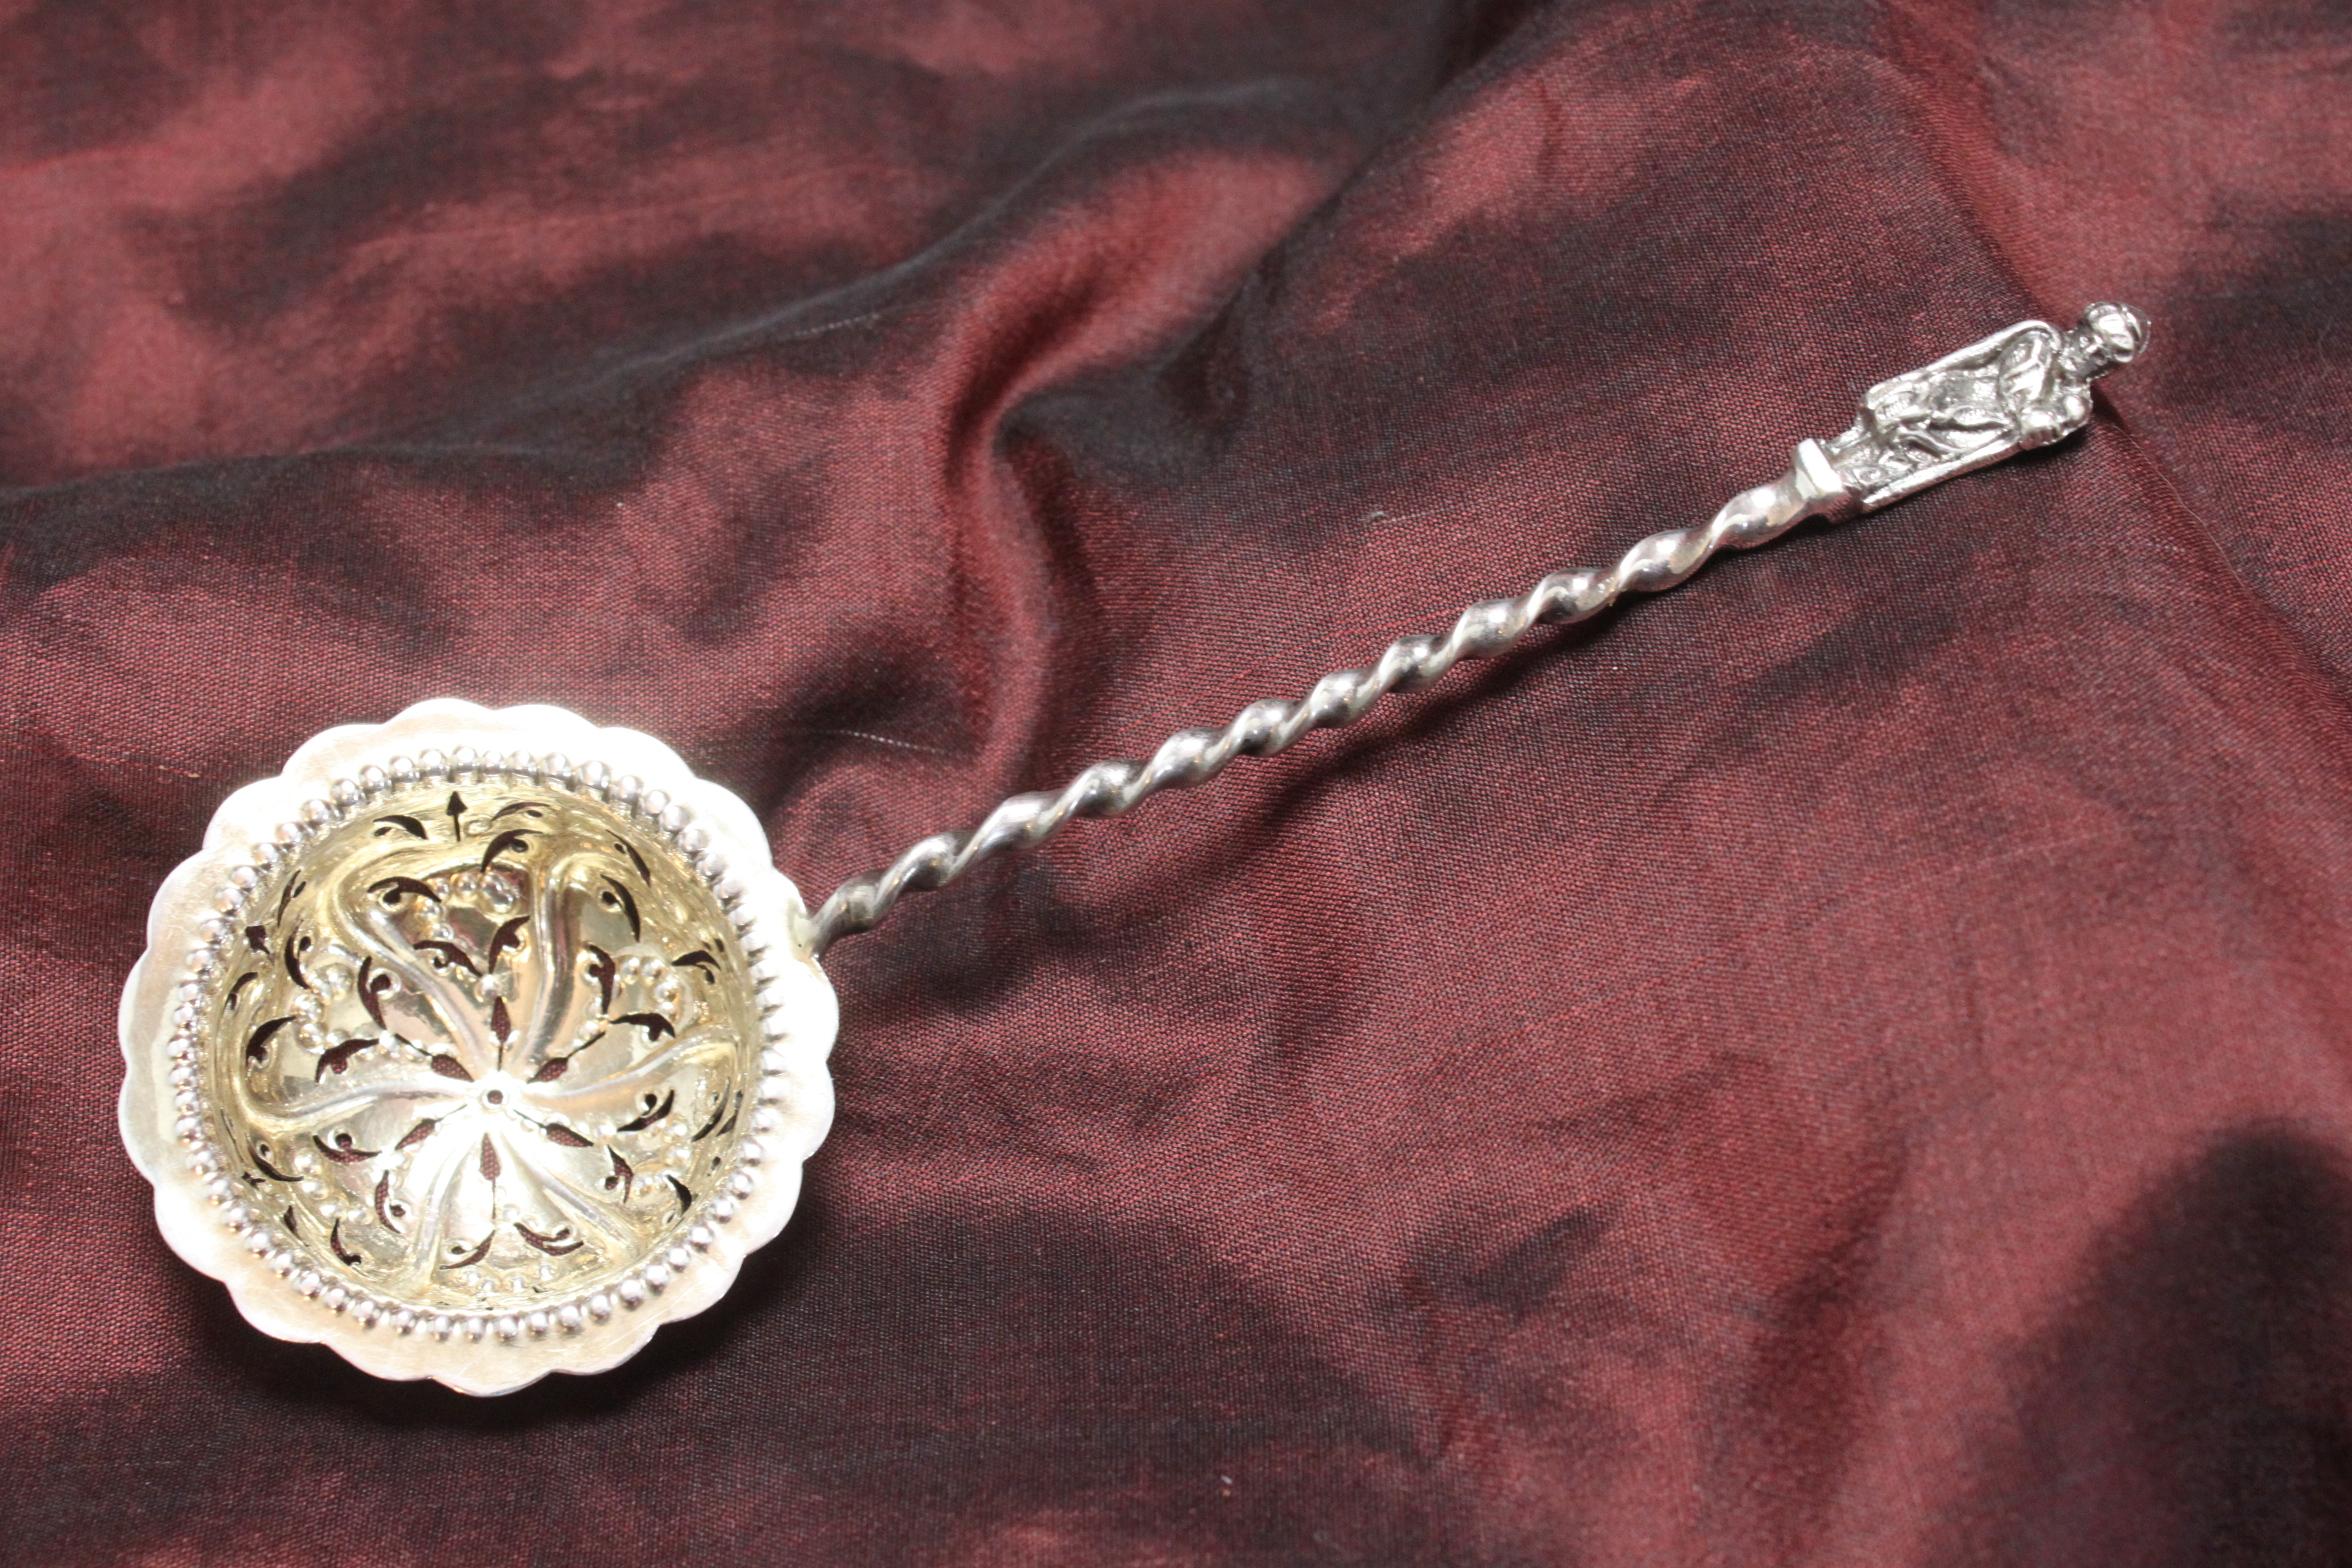 This very decorative sterling silver sifter spoon was made by Charles Harris in London in 1889.  On top of the barley twist handle is a cast silver figure of a man in a Middle Eastern cloak and turban who is holding a staff. The bowl has been very